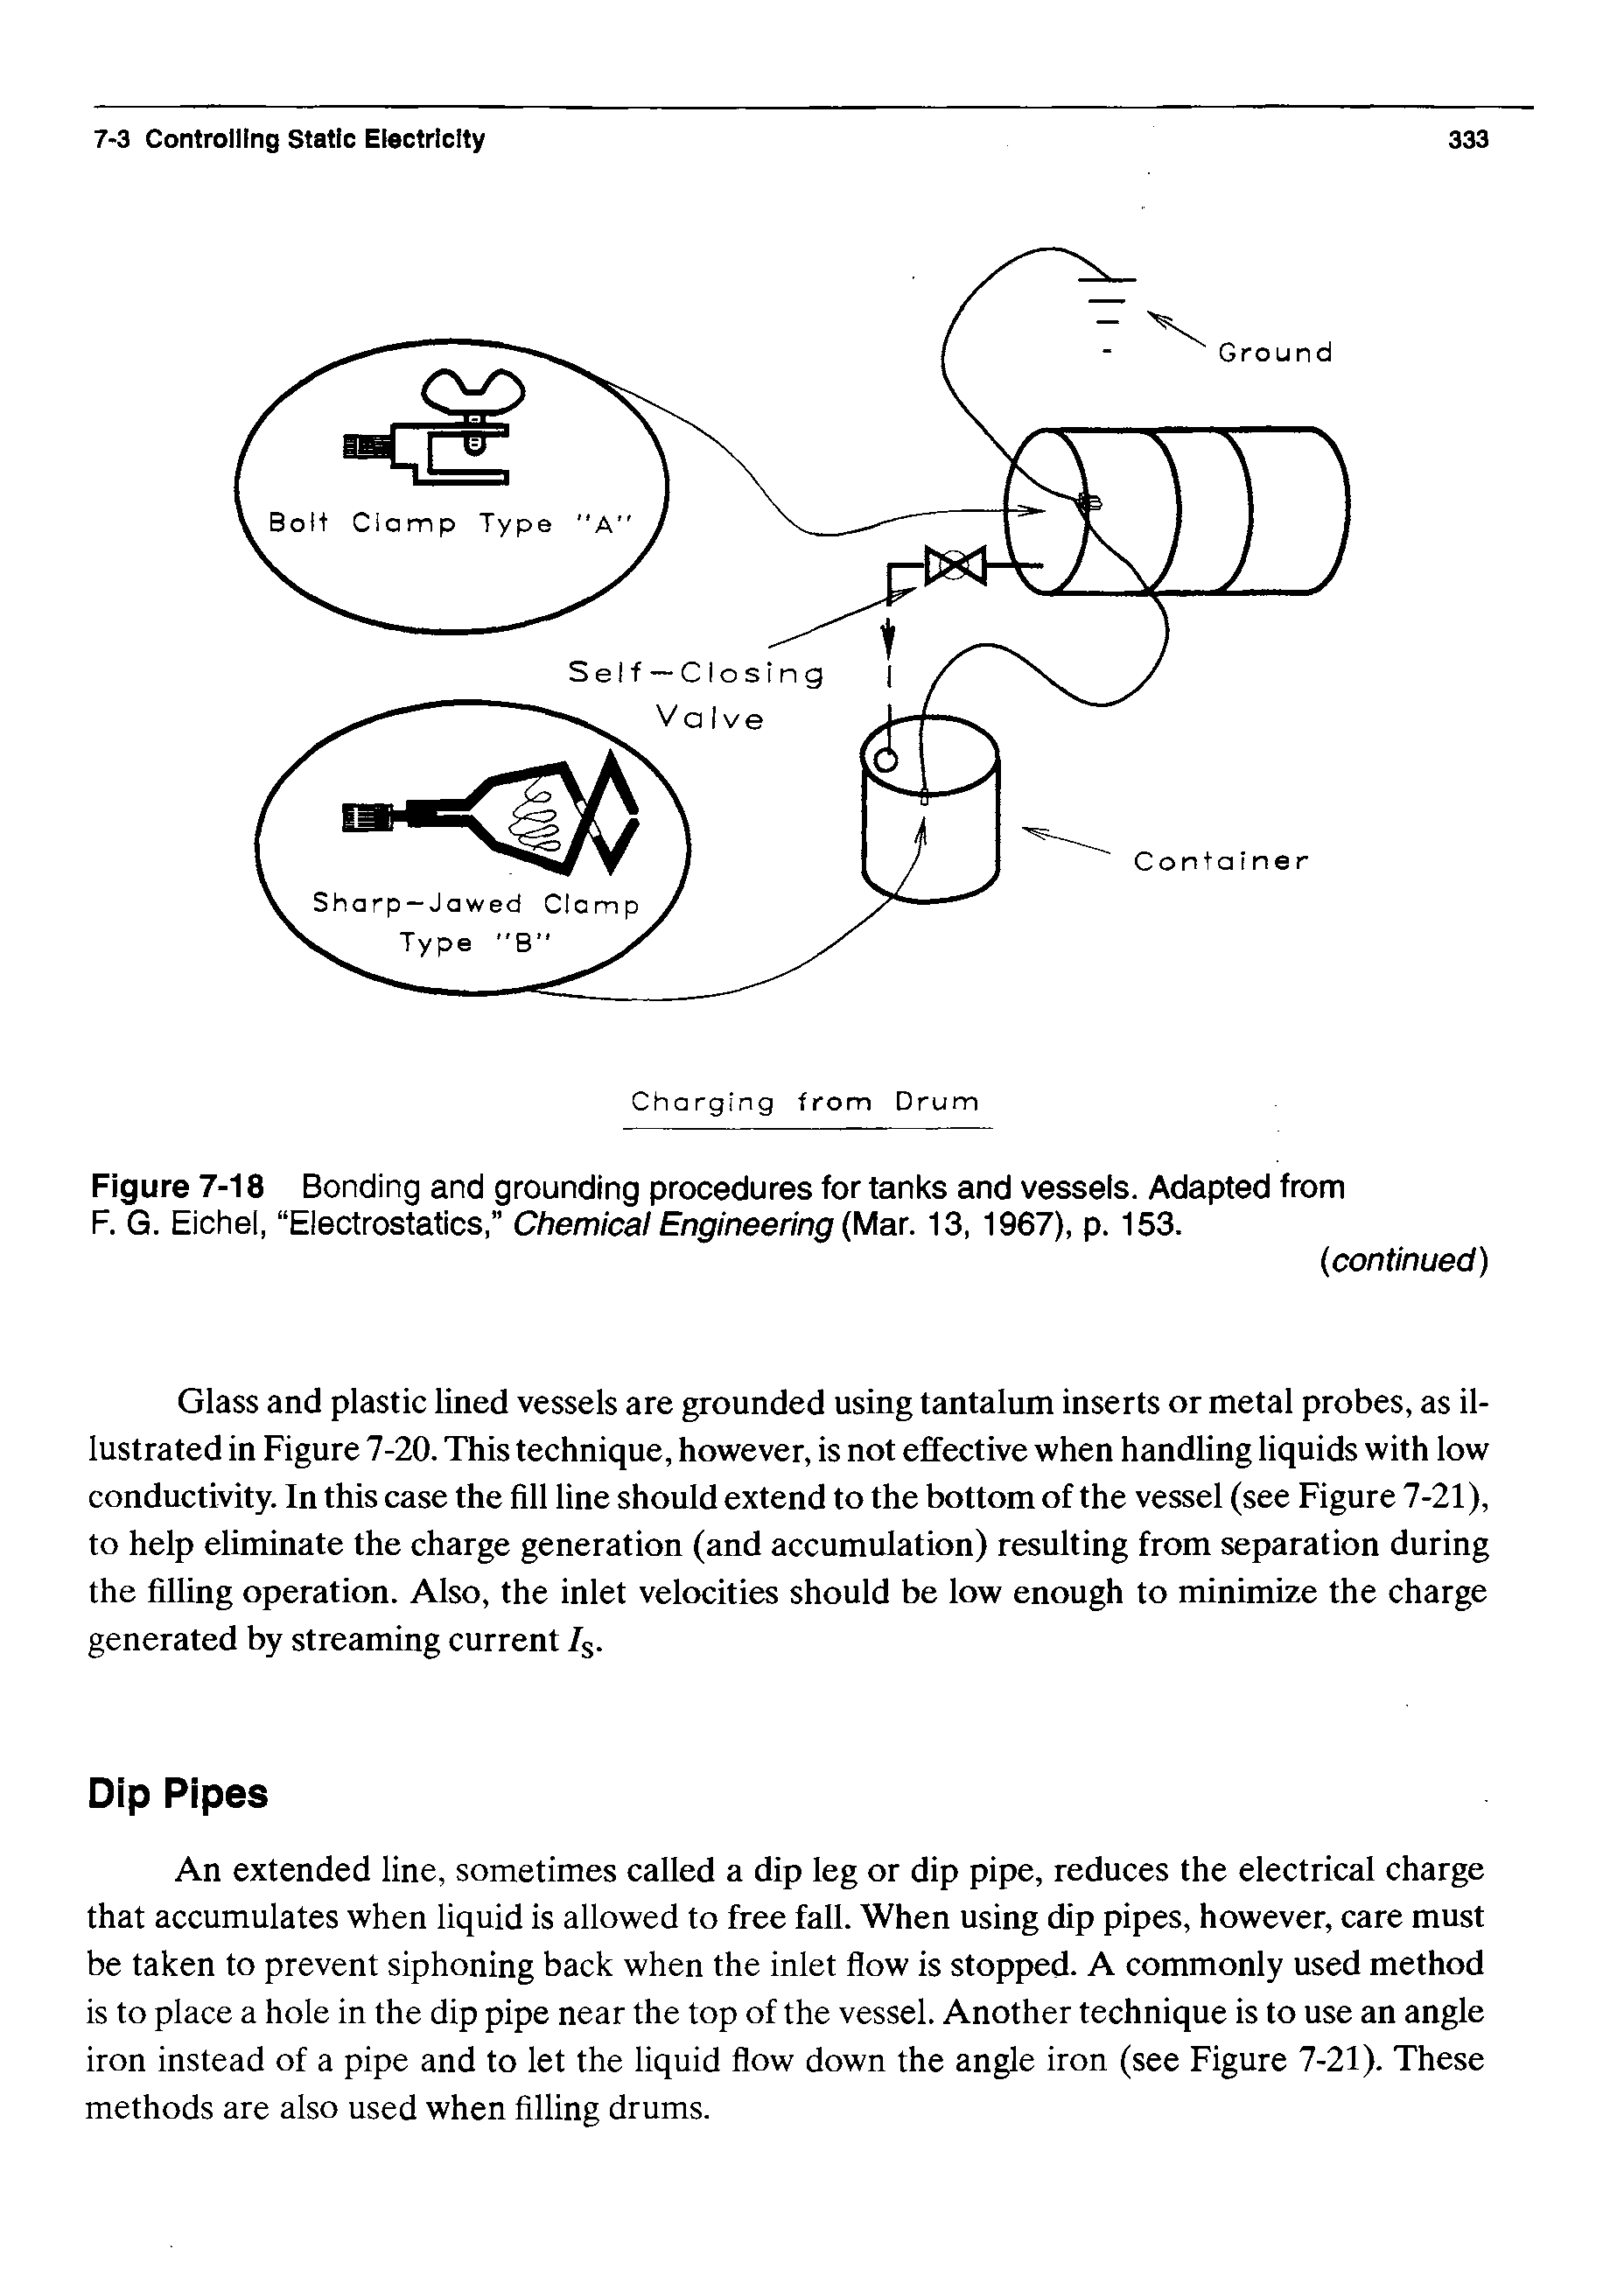 Figure 7-18 Bonding and grounding procedures for tanks and vessels. Adapted from F. G. Eichel, Electrostatics, Chemical Engineering (Mar. 13, 1967), p. 153.